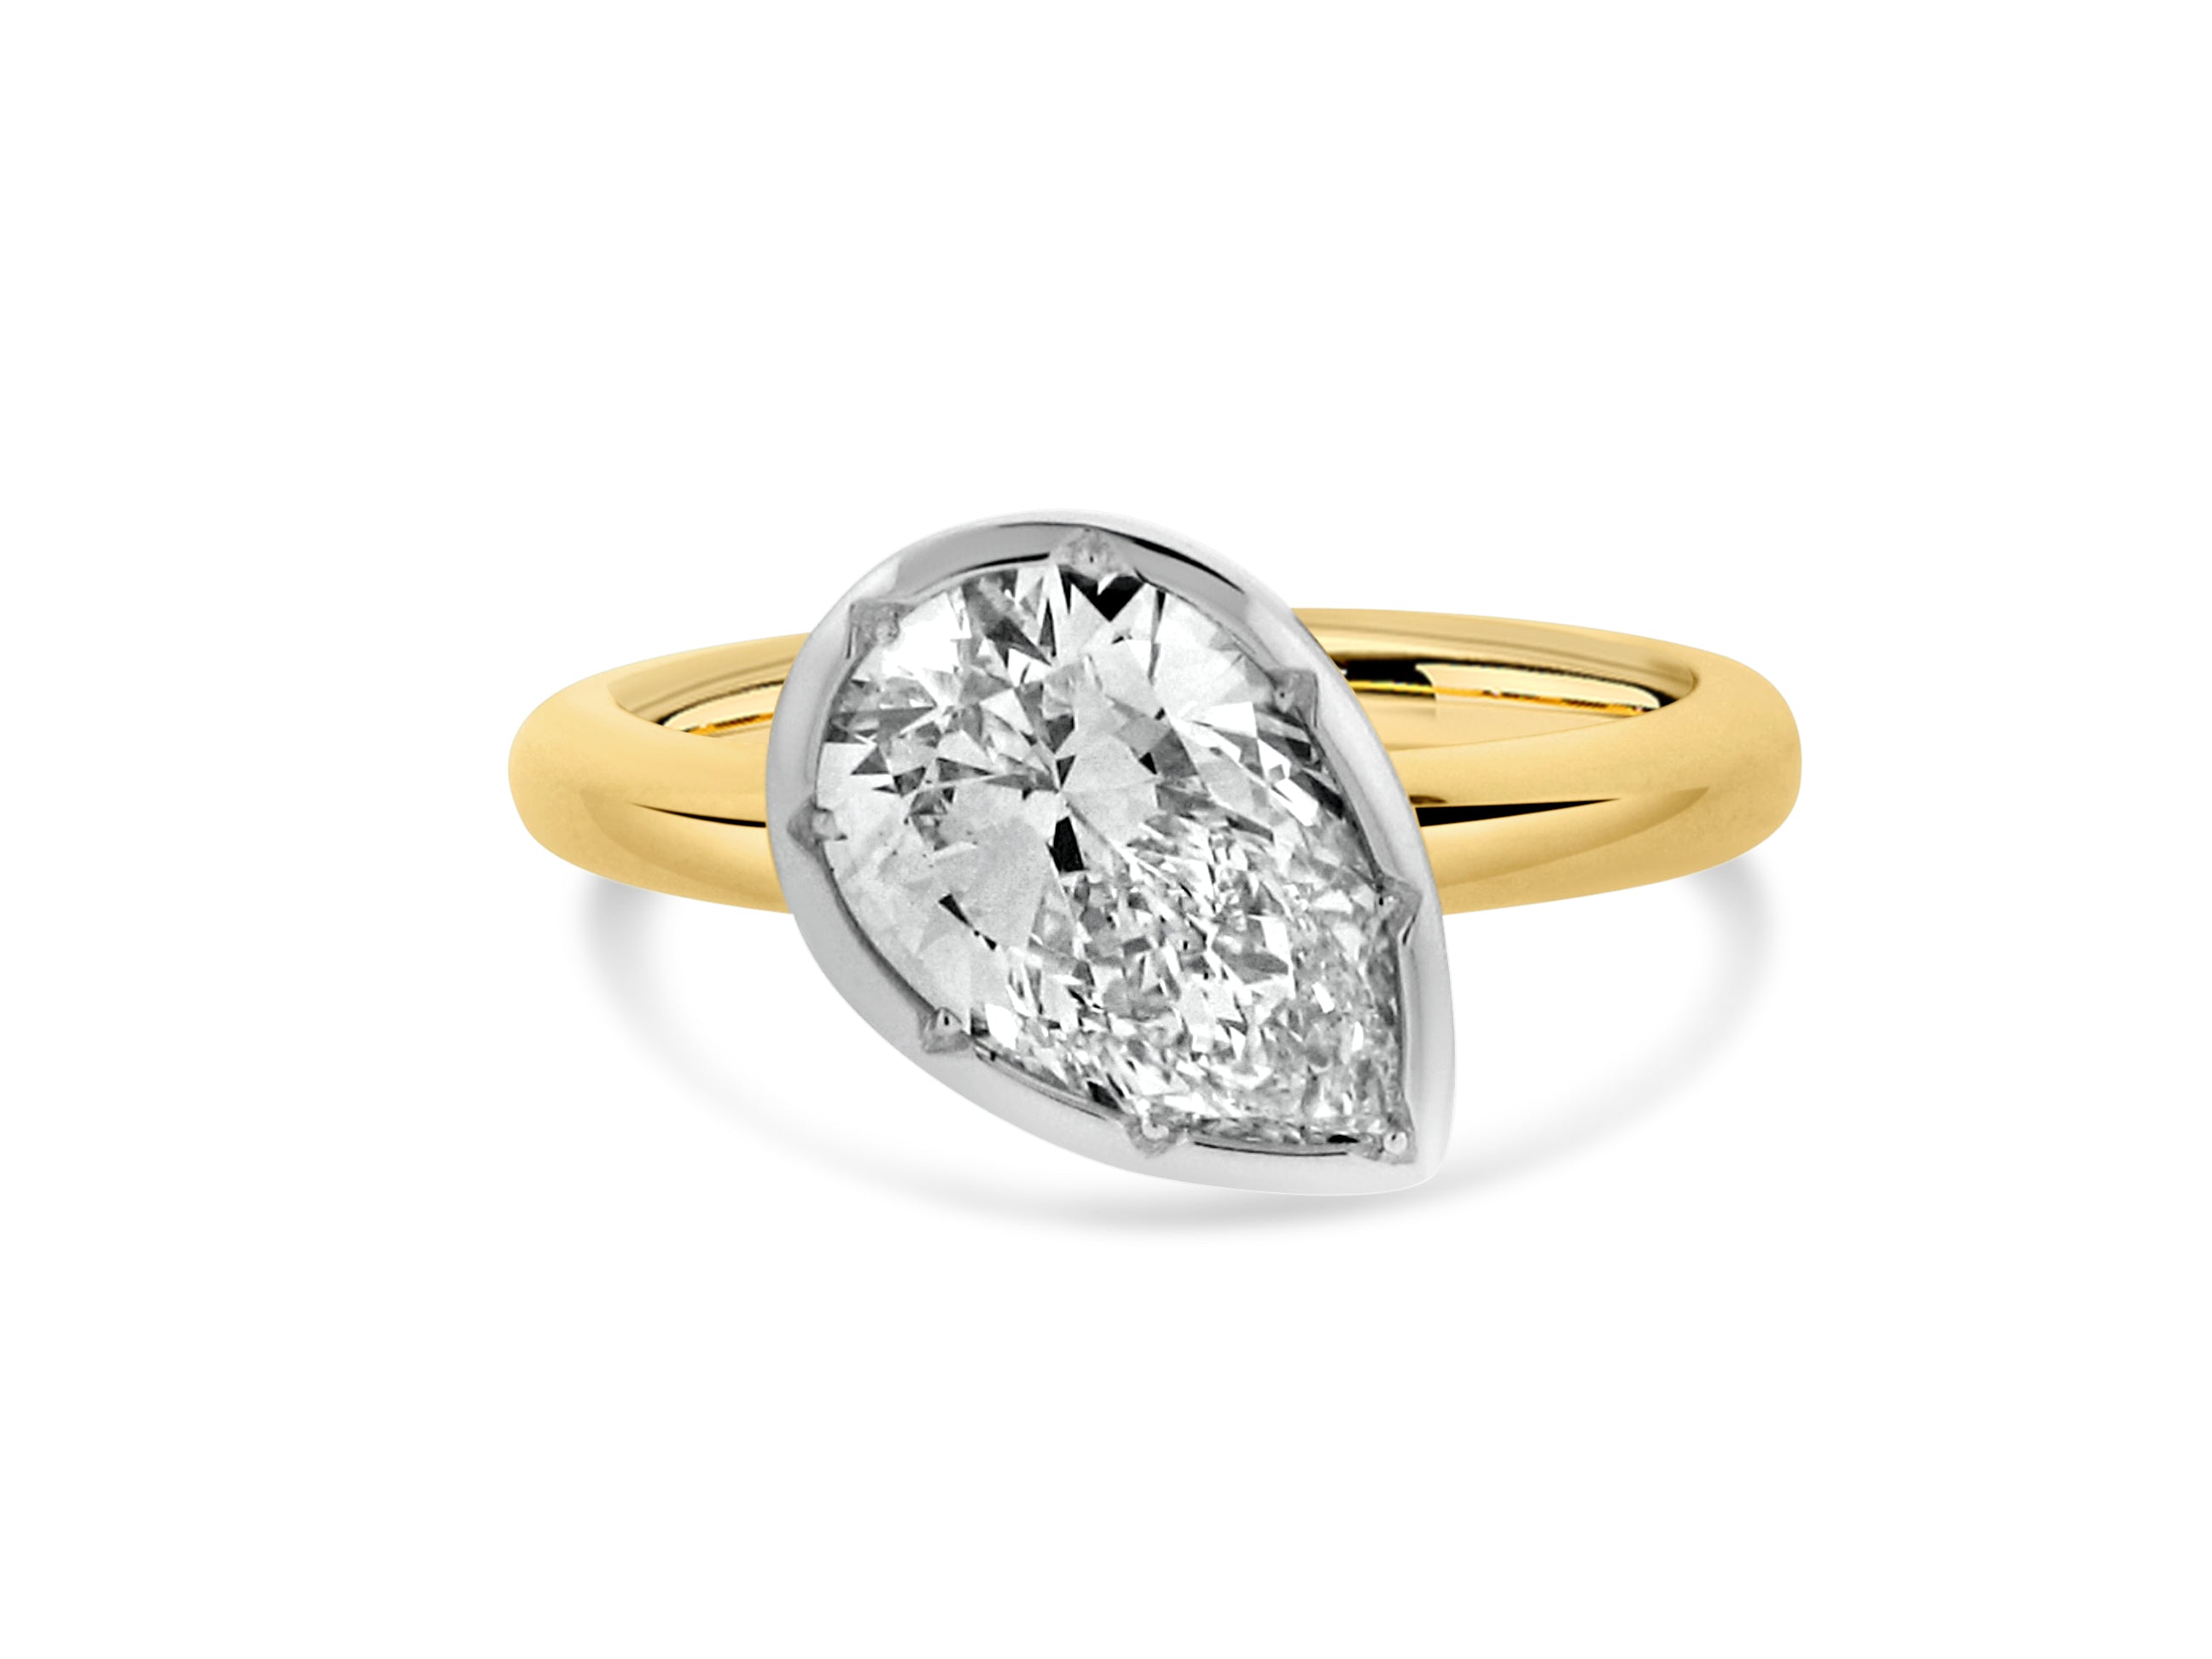 PRIVE' 18K YELLOW AND WHITE GOLD BEZEL SET "ABSTRACT" 2.03CT PEAR SHAPED SWAROVSKI LAB GROWN CERTIFIED DIAMOND